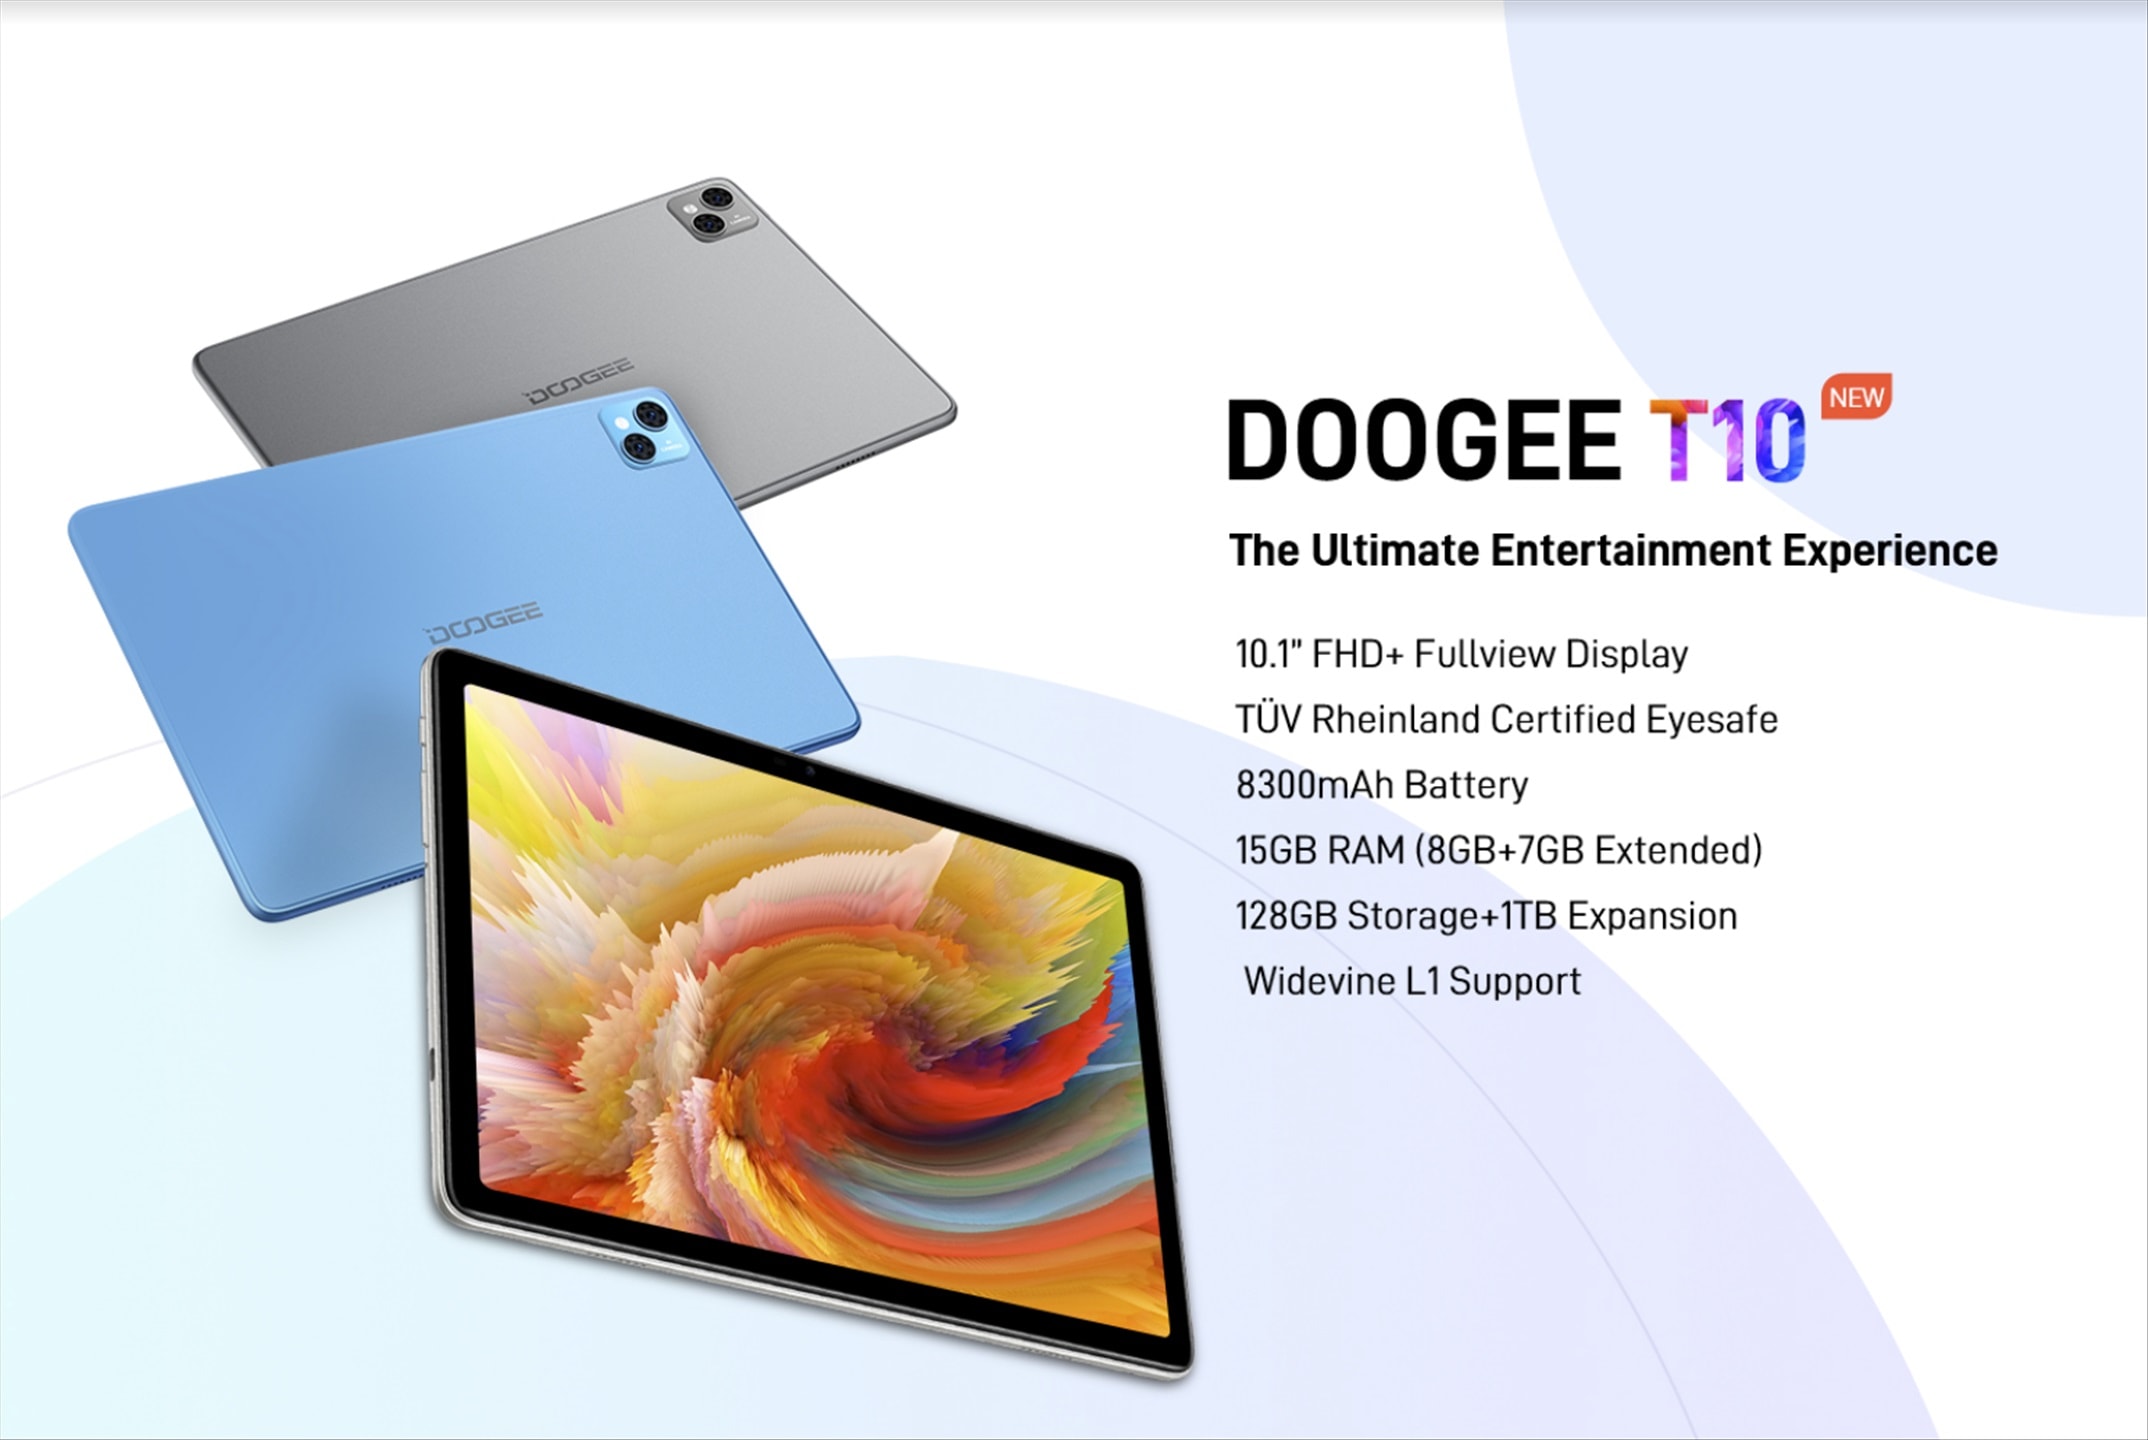 Doogee’s First Tablet T10 will refresh you with Ultimate Entertainment